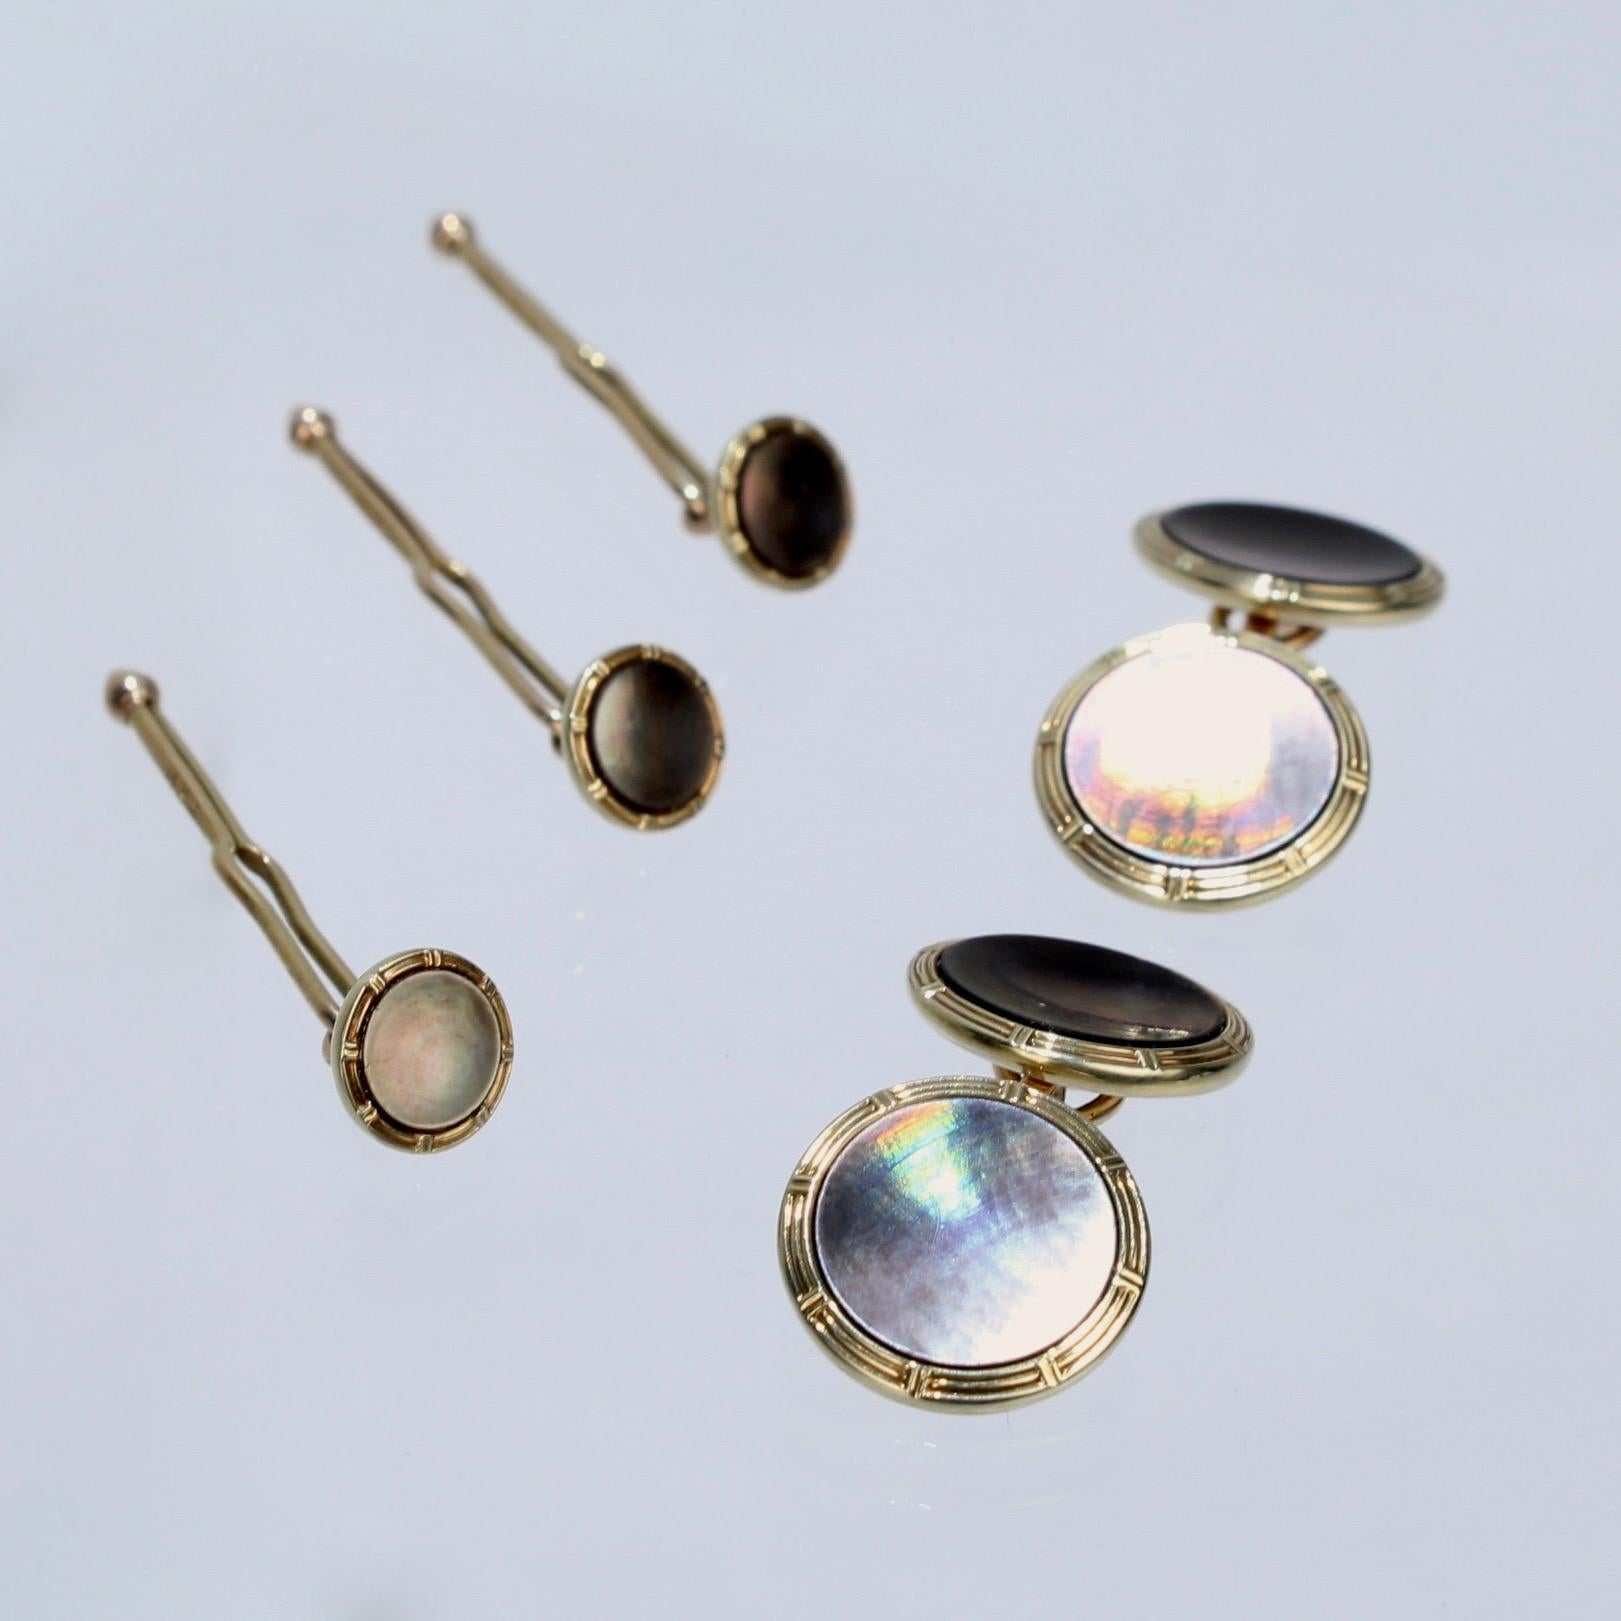 Glorious Krementz cuff links Mother of Pearl Pearl and platinum!